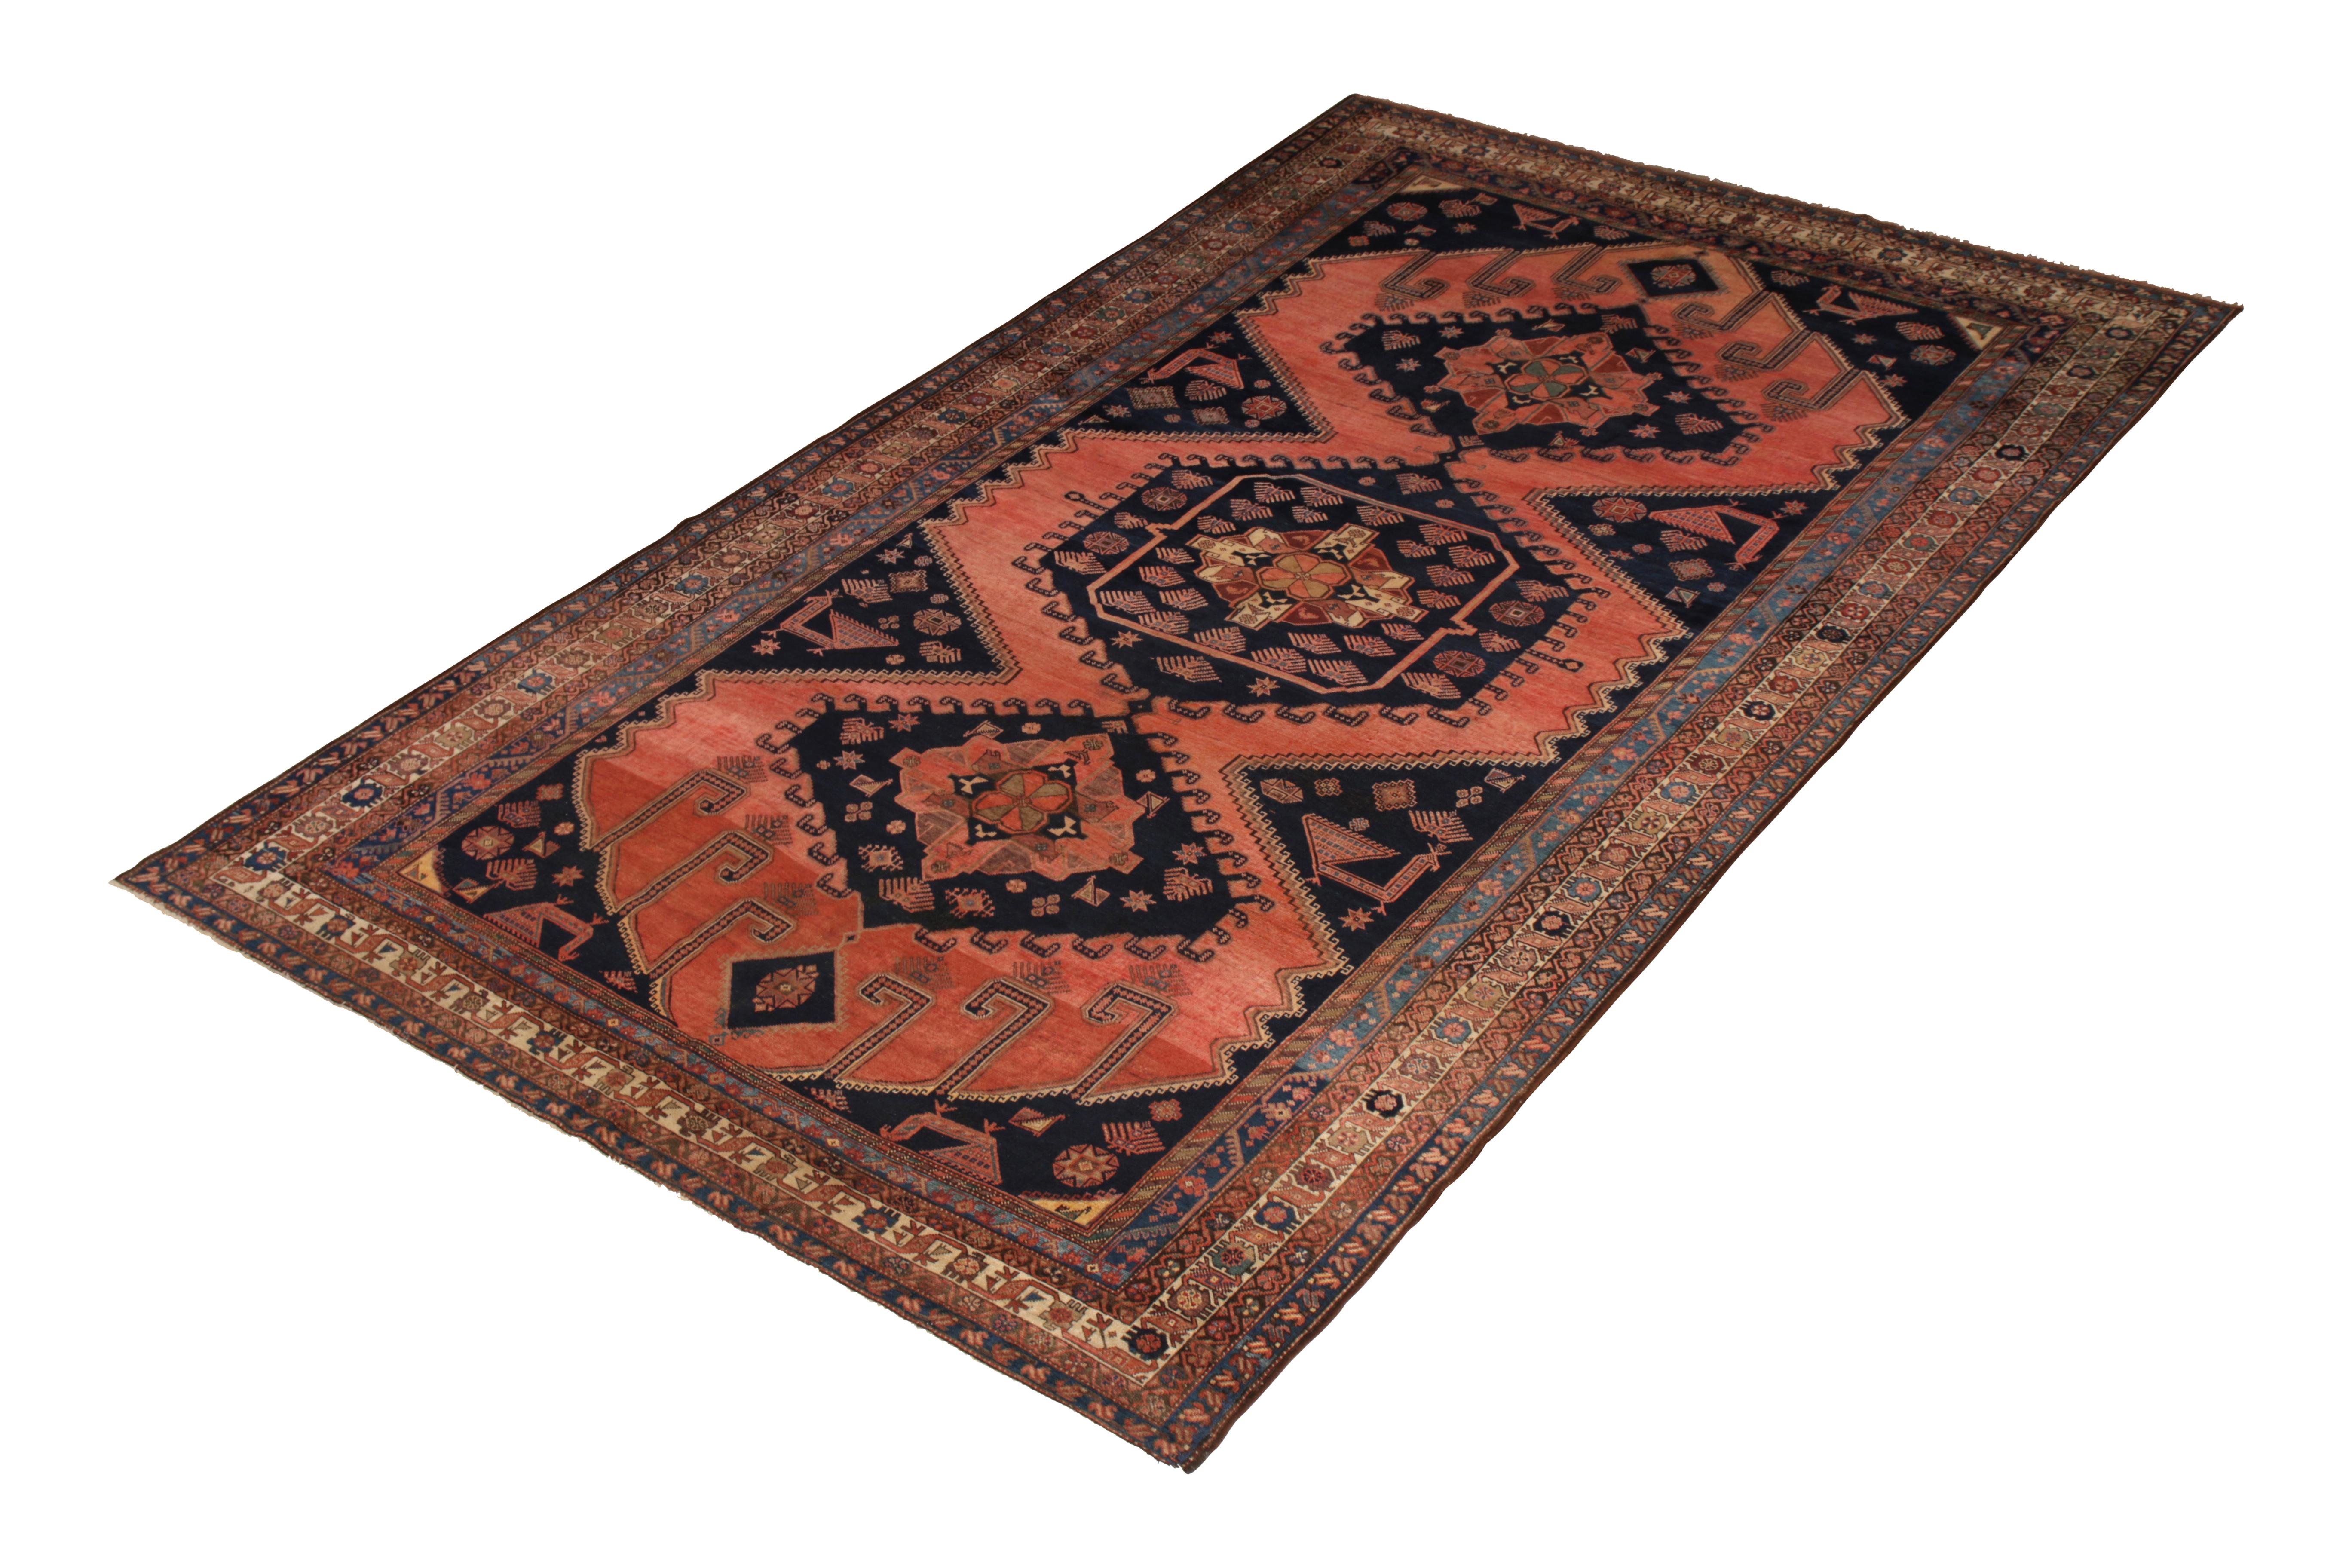 Hand knotted in wool originating from Persia circa 1890-1900, this antique Persian rug connotes an Afshar rug design, enjoying a distinctive coral-red colorway juxtaposed beautifully with the navy blue background notes. The subtle abrash complements